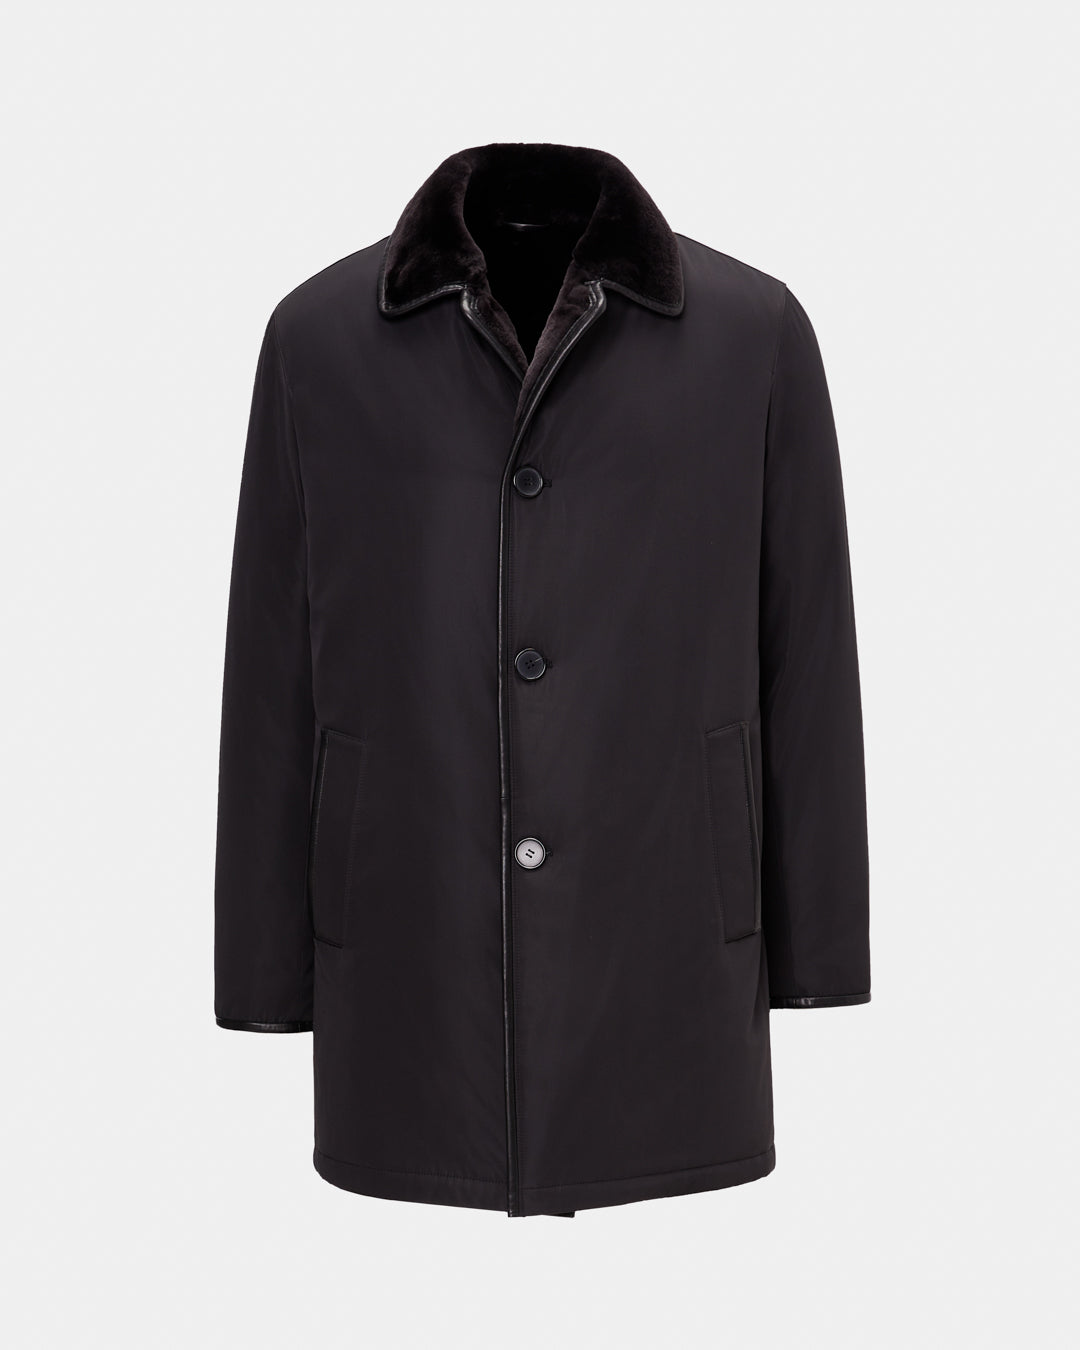 Black coat with shearling interior